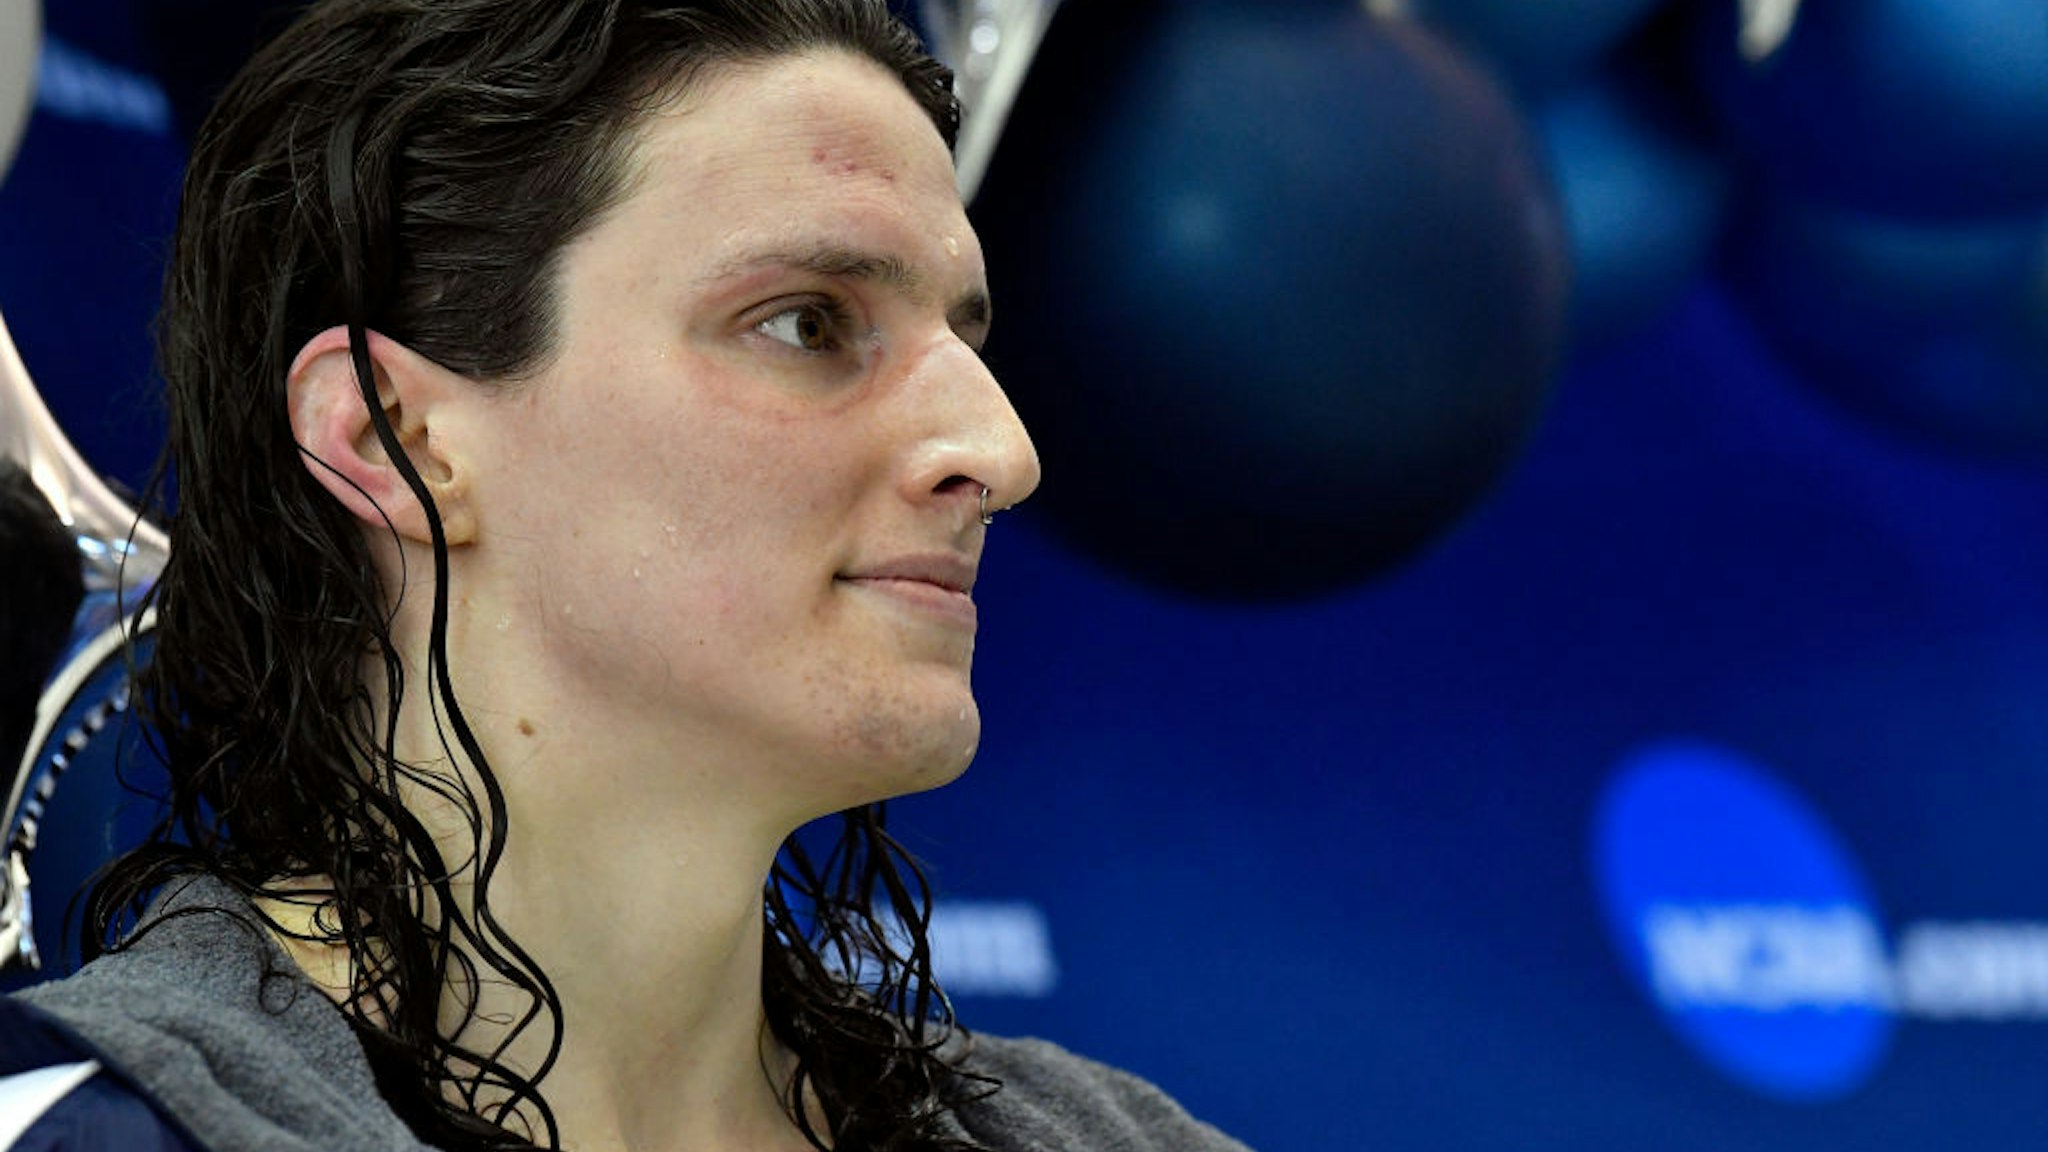 Lia Thomas looks on after winning the 500 Yard Freestyle during the 2022 NCAA Division I Women's Swimming & Diving Championship at the McAuley Aquatic Center on the campus of the Georgia Institute of Technology on March 17, 2022 in Atlanta, Georgia.